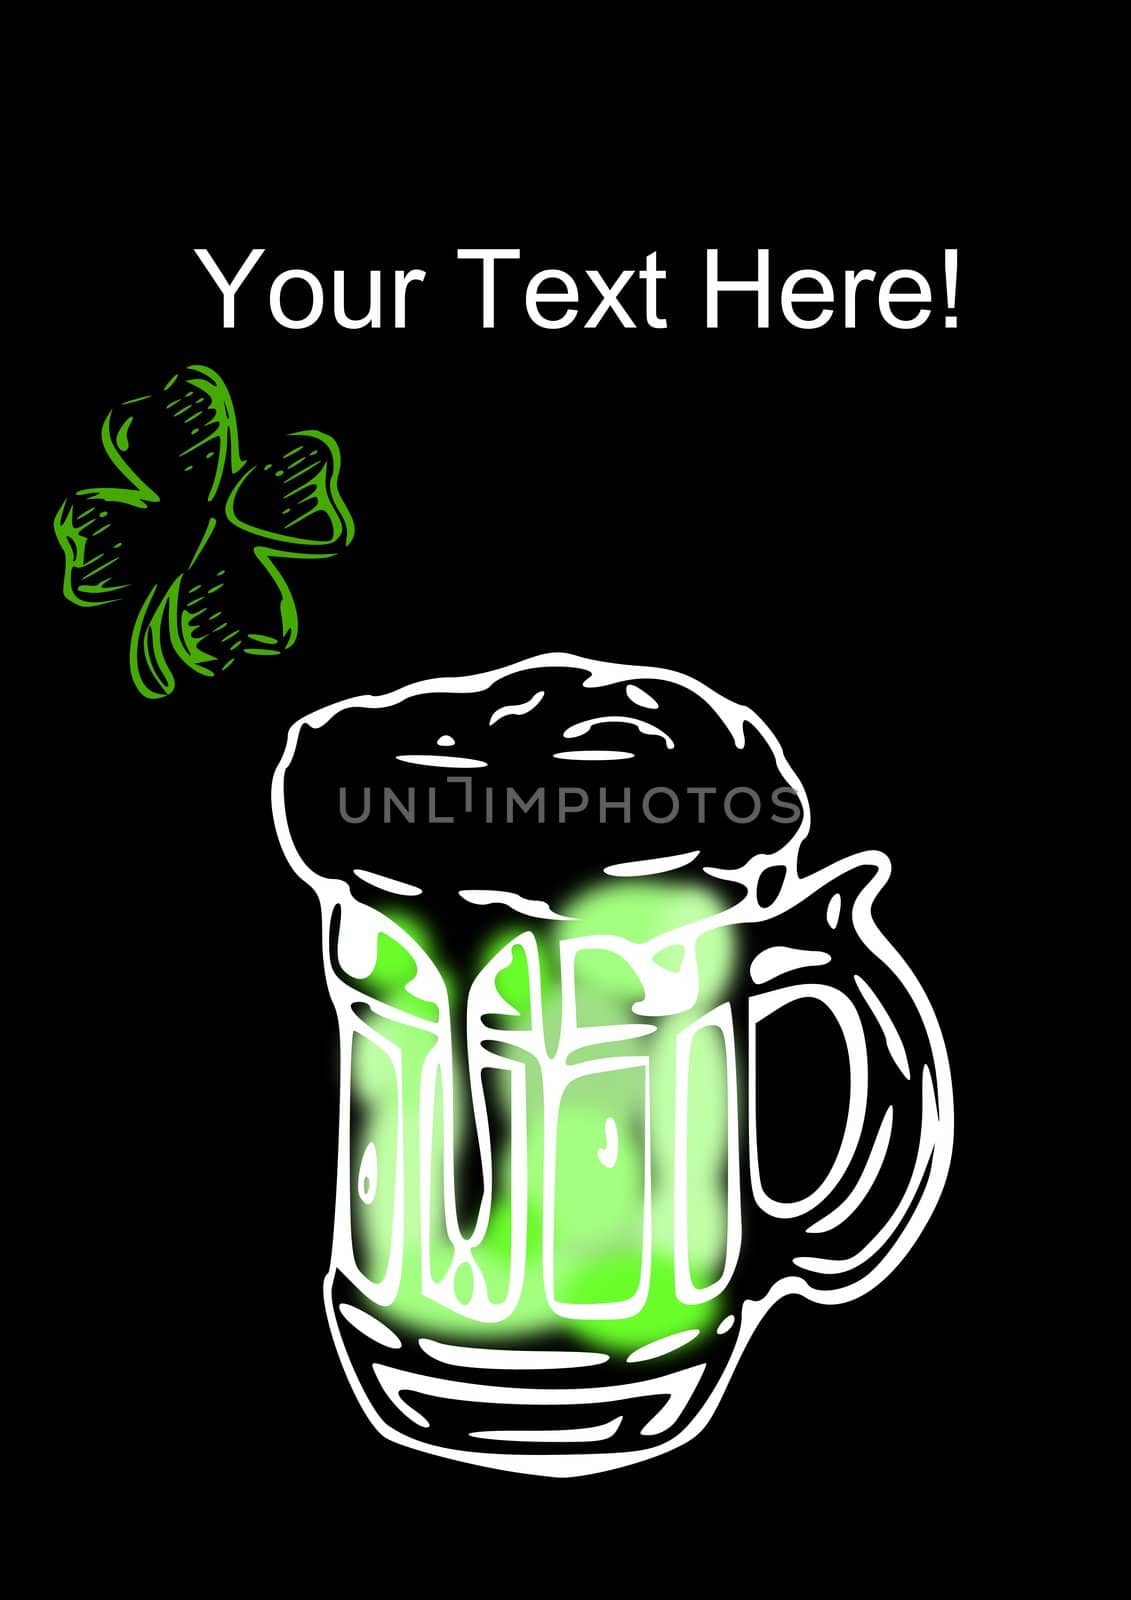 Add your text here to help make a St. Patrick’s Day graphic.